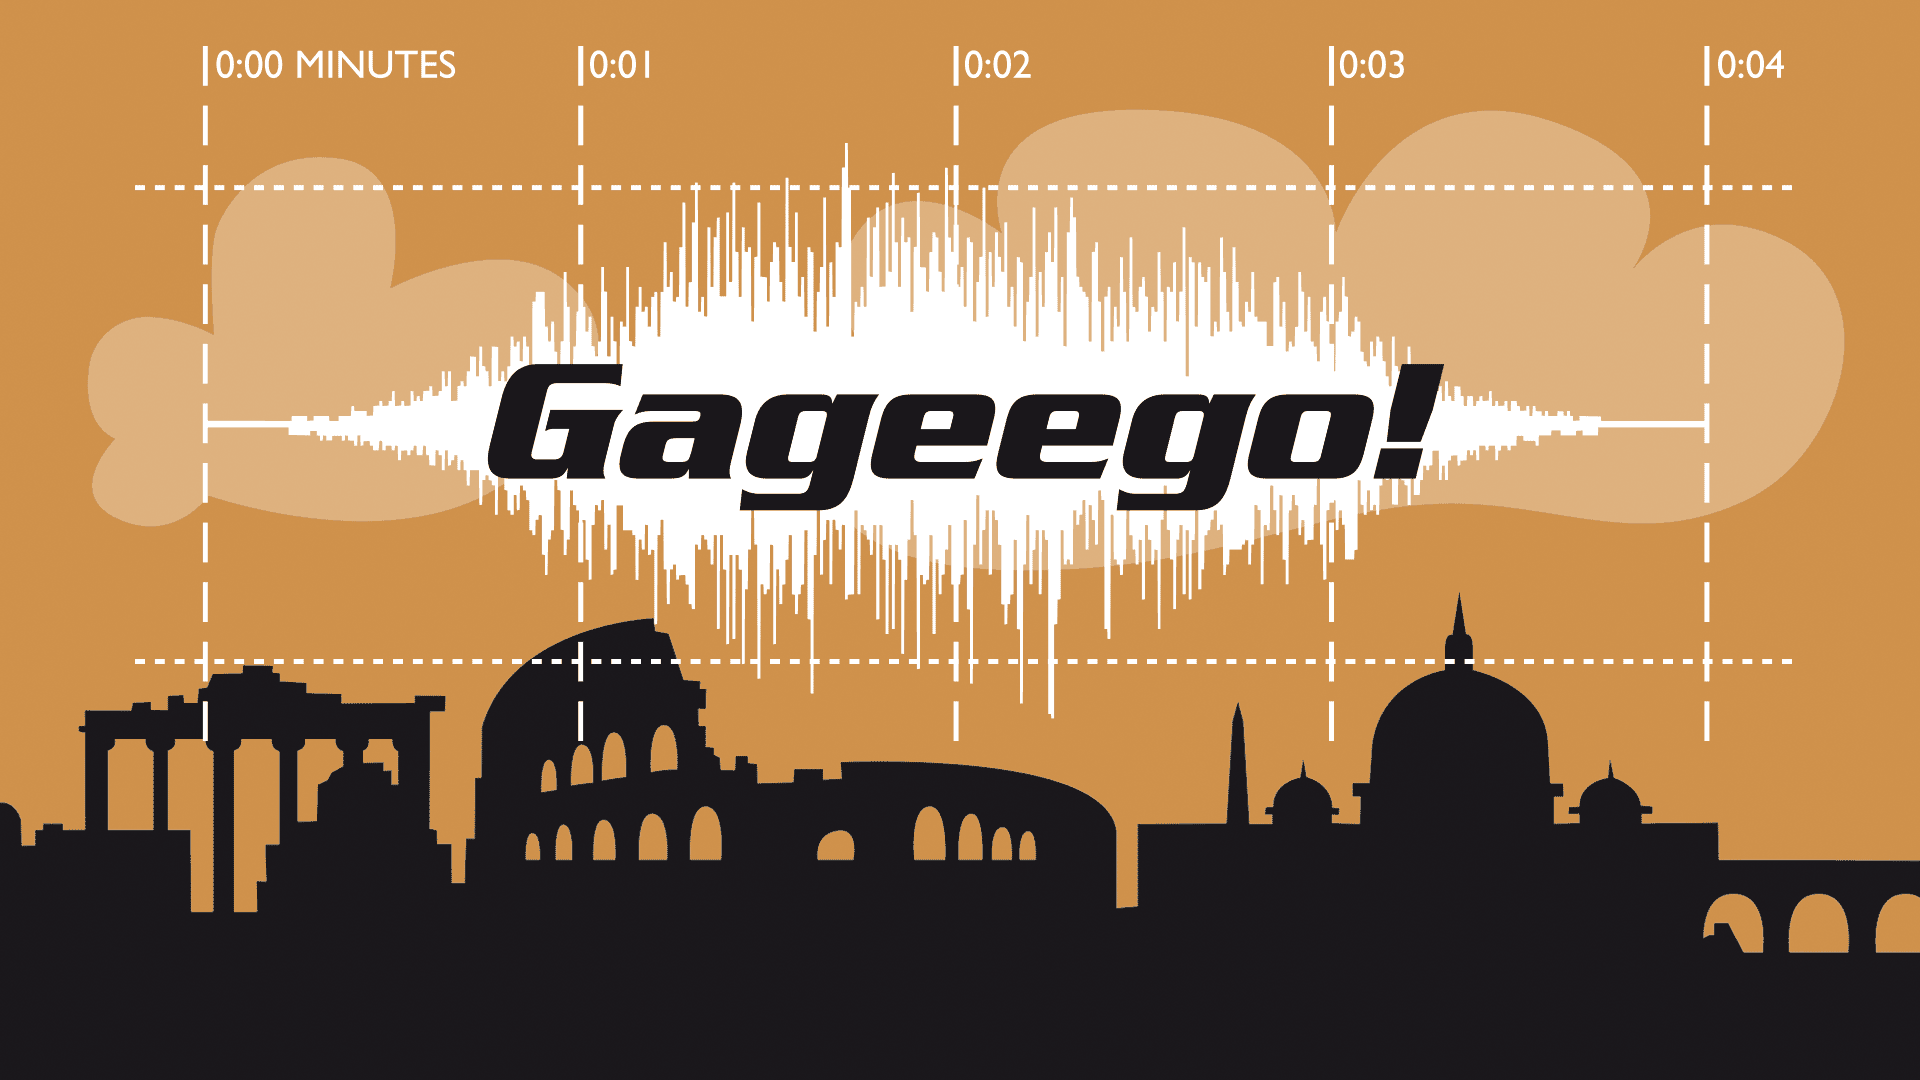 Gageego! A Tale of Four Cities: Rome